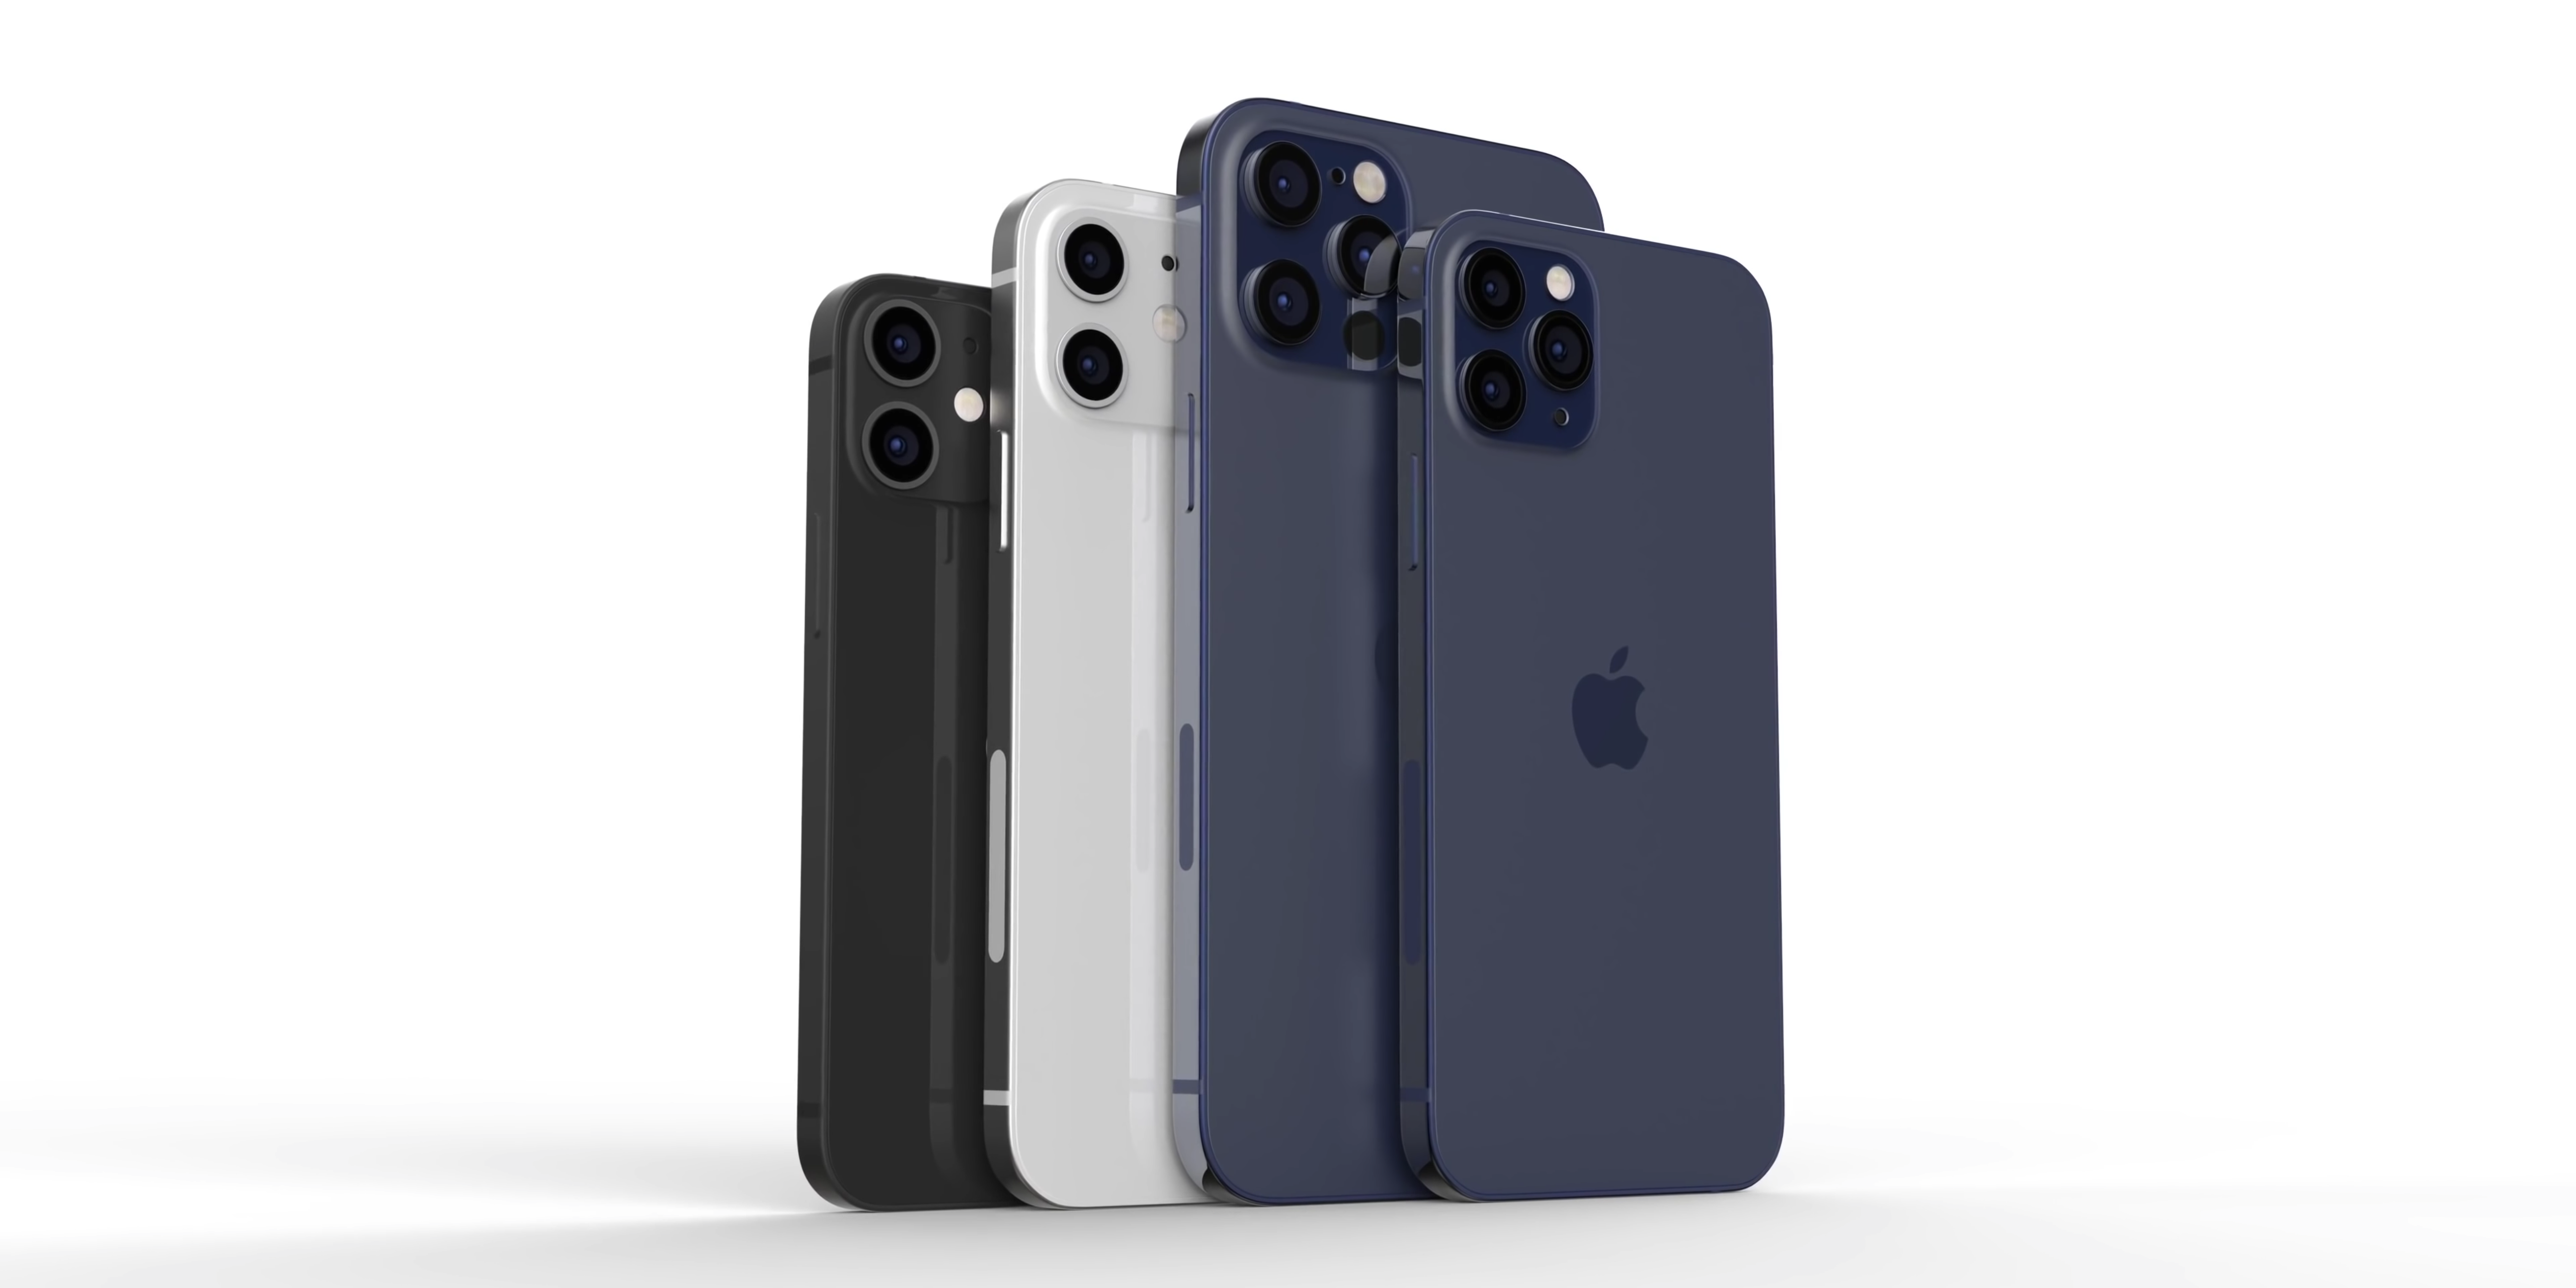 iPhone 12 Pro latest leaks, rumours and predictions August 2020